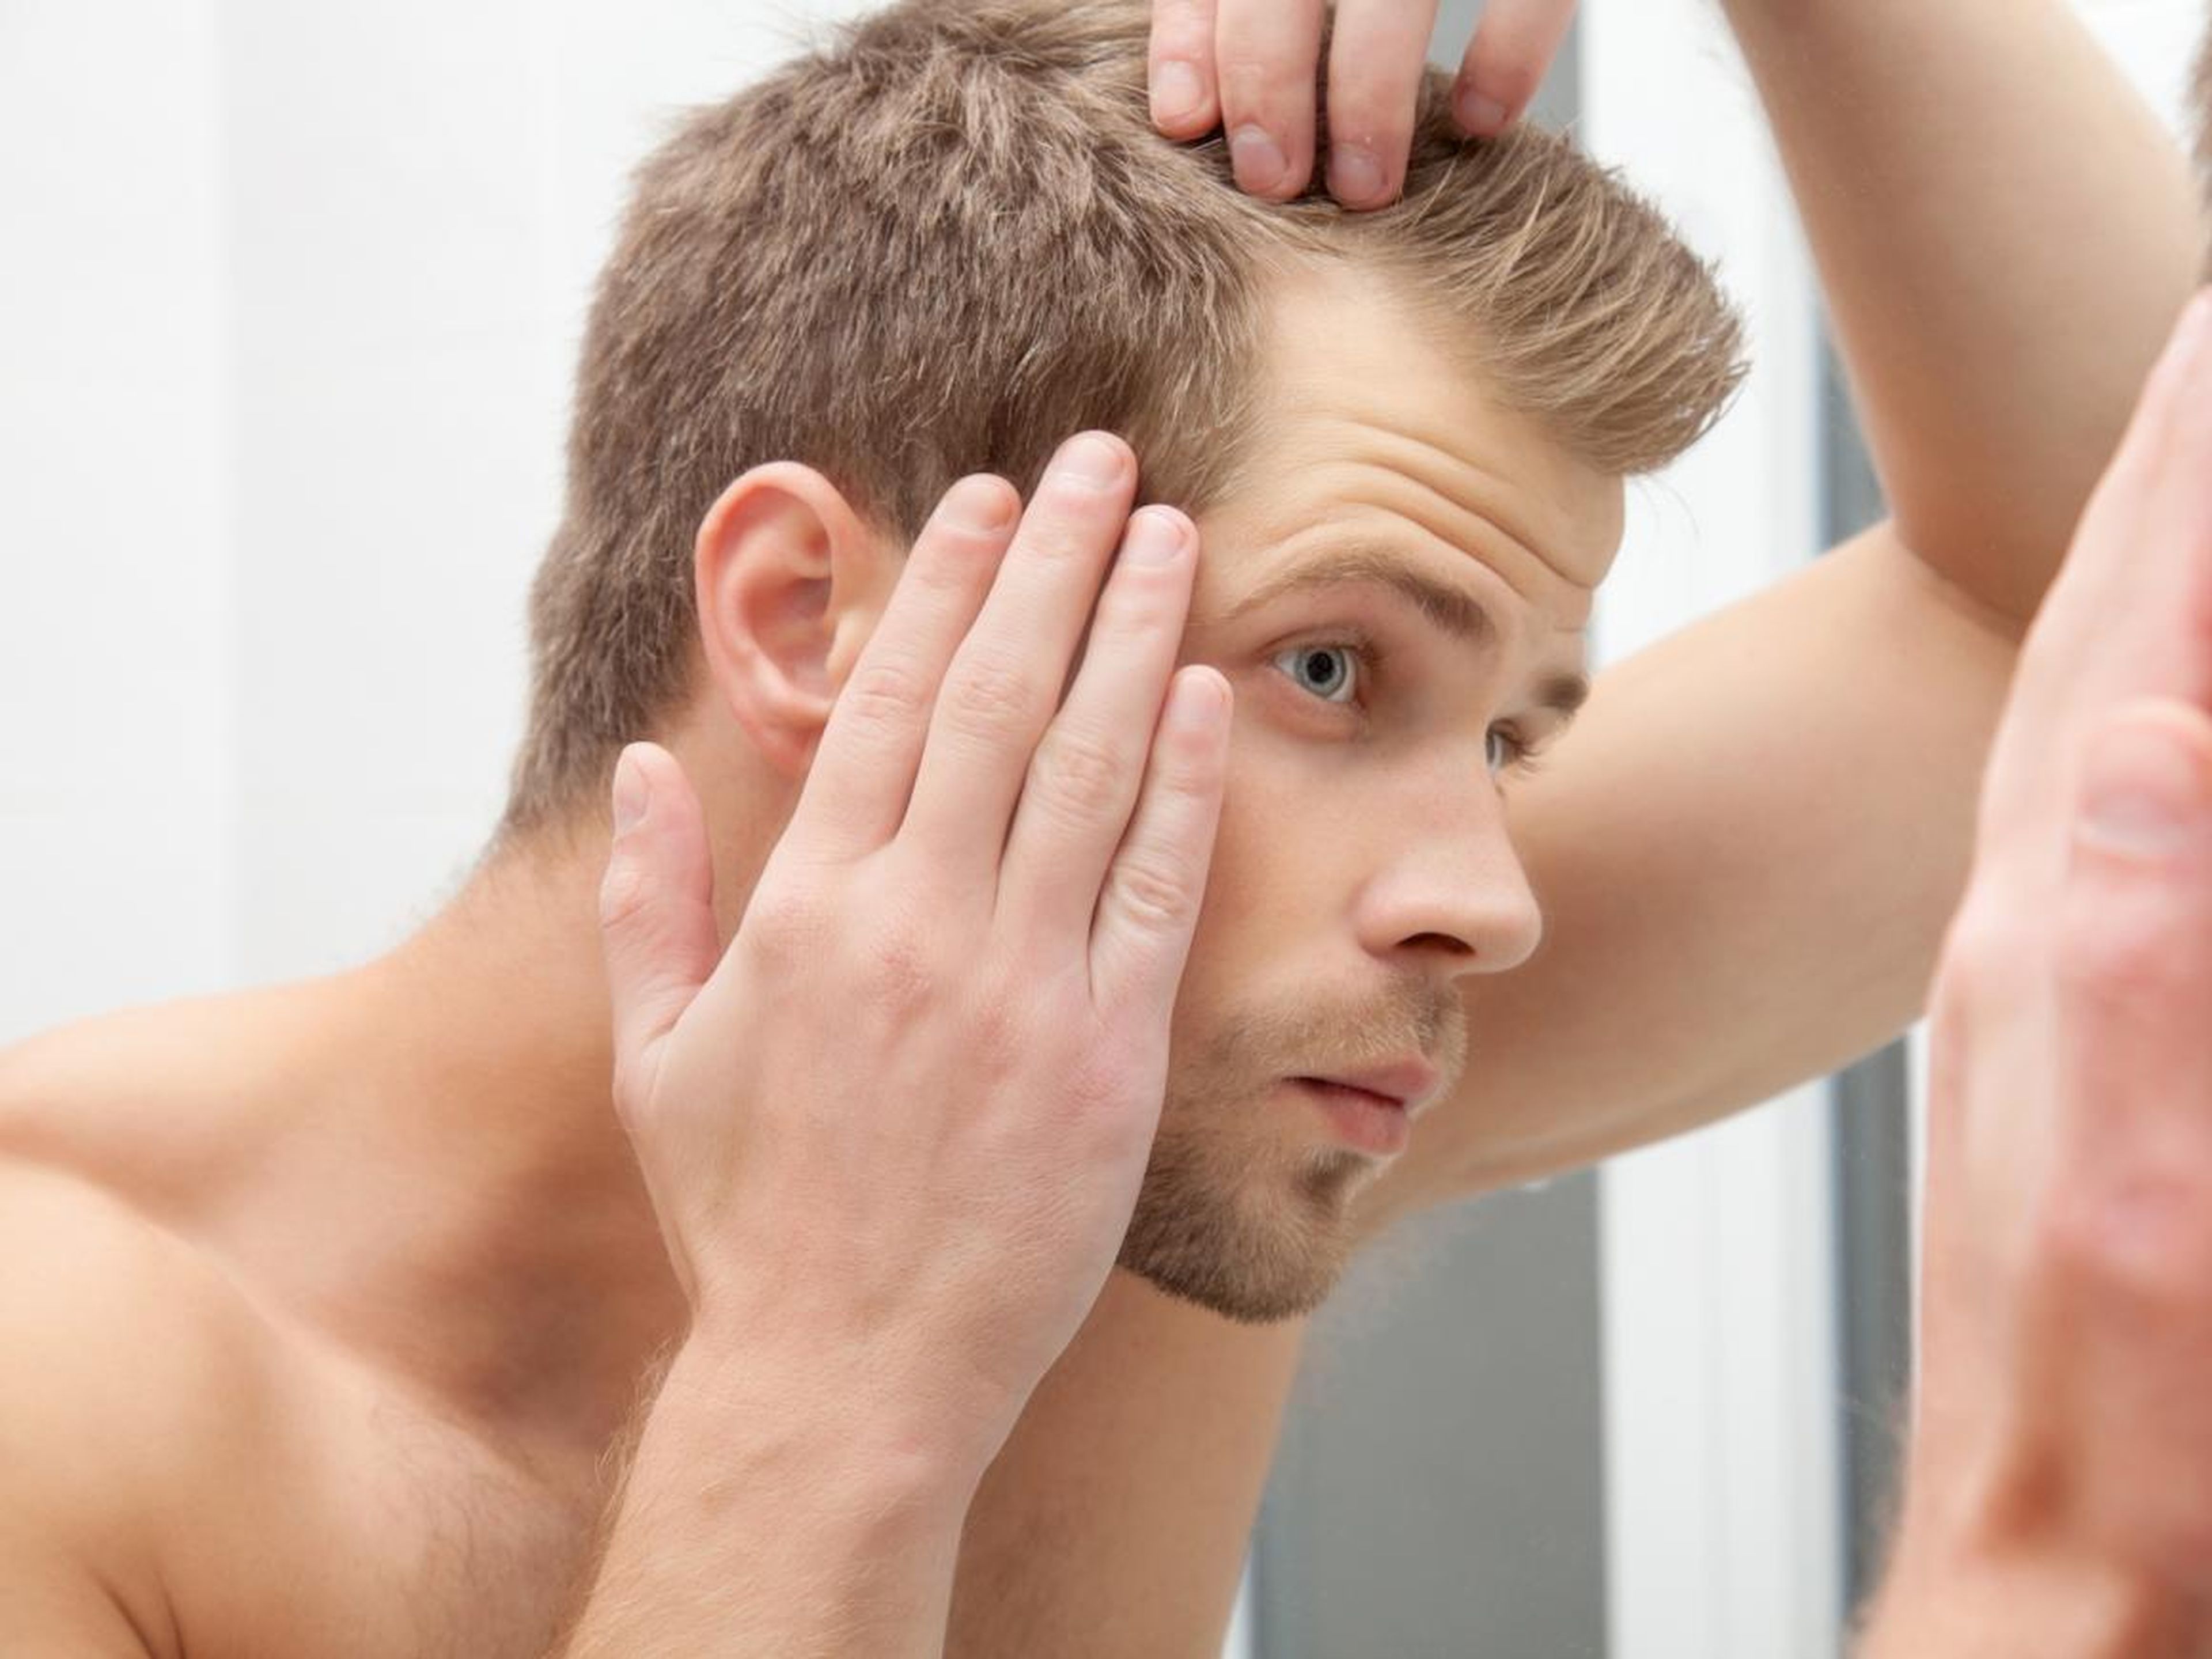 Hair loss could be a symptom of a larger medical issue.